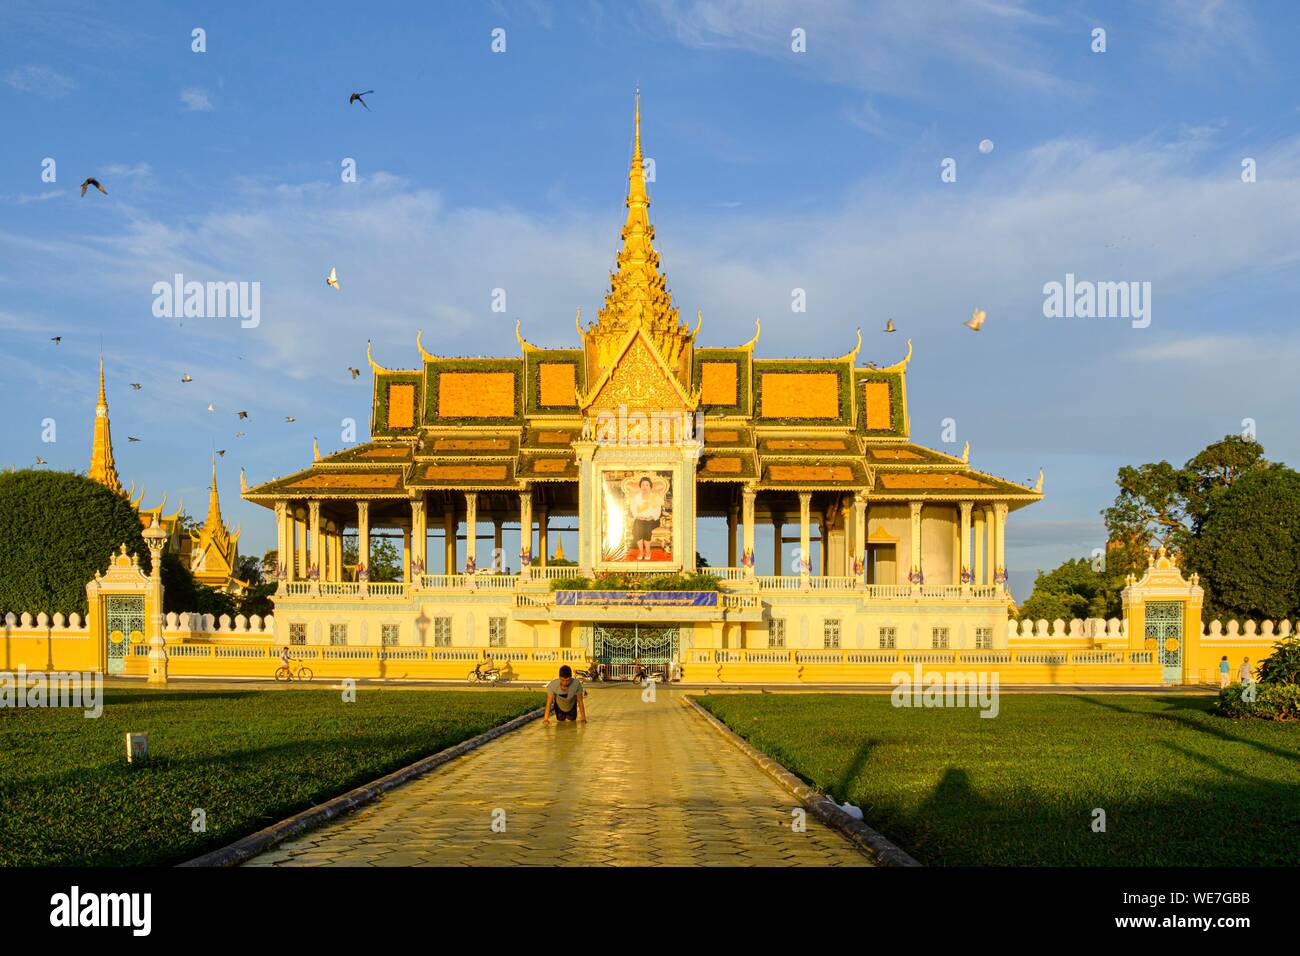 Cambodia, Phnom Penh, the Royal Palace, residence of the King of Cambodia, built in 1860 Stock Photo